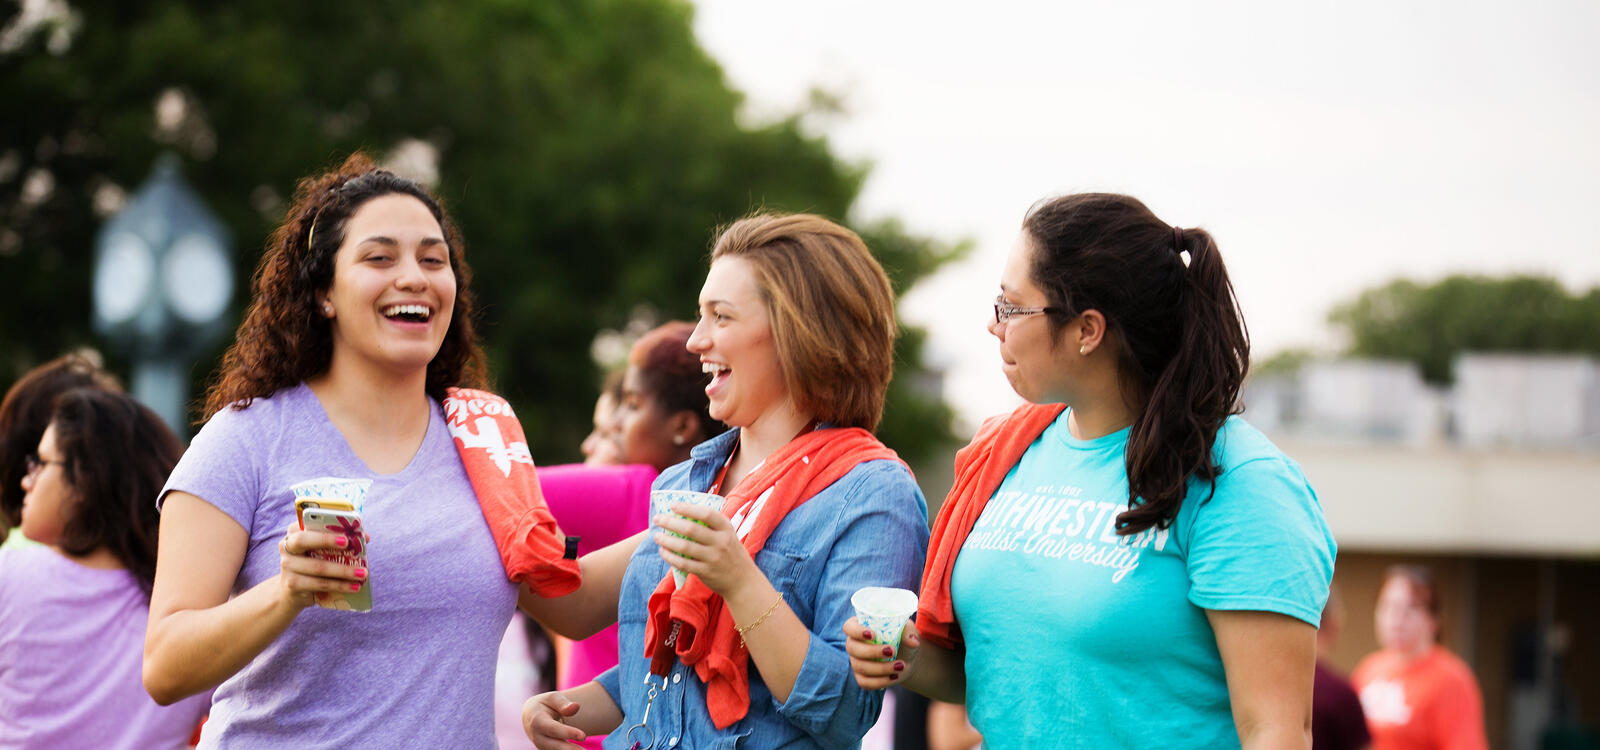 Three female students with snow cones in hand, smile and laugh as they stand outside